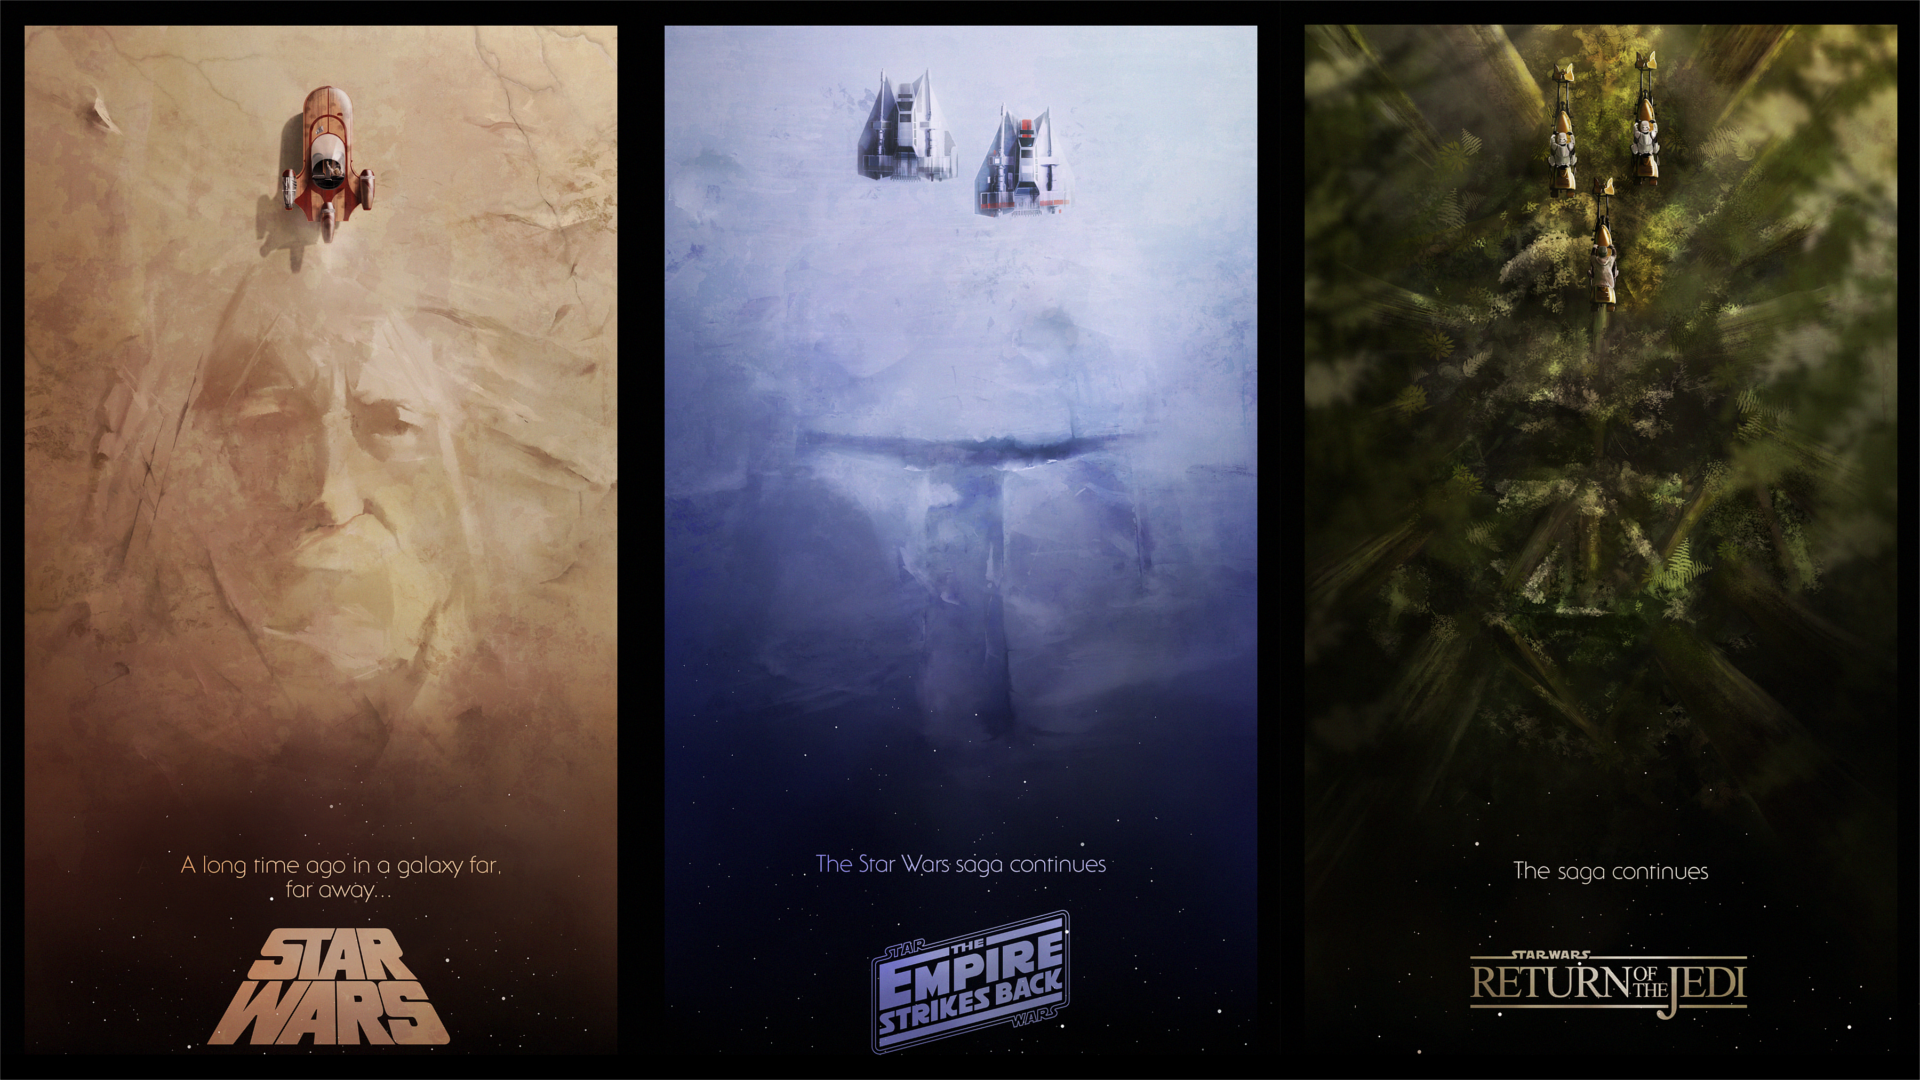 Three Fan Made Star Wars Posters. Post 63788 Fanmade Star Wars Posters Are Haunting. Star Wars Wallpaper, Star Wars Poster, Star Wars Prints